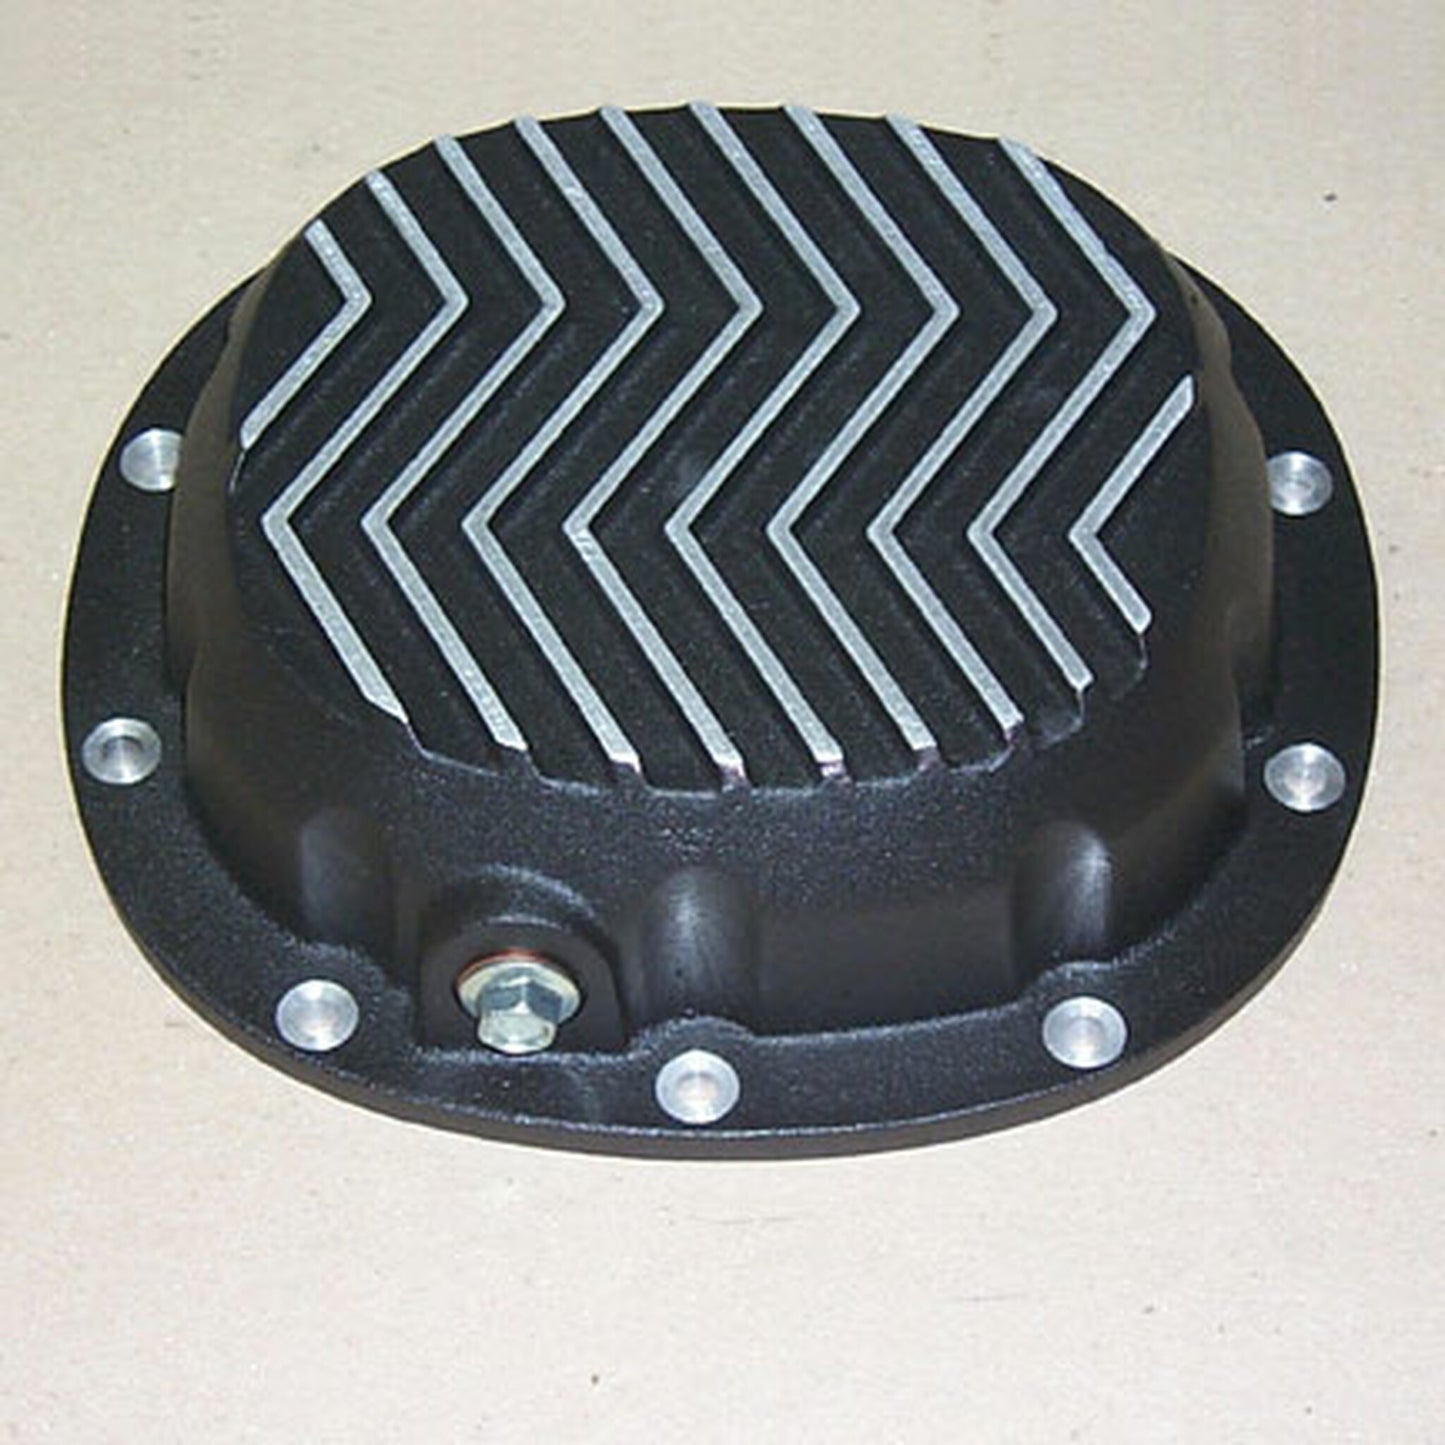 GM 7.5", 7.625" Differential Cover Patterned Fins